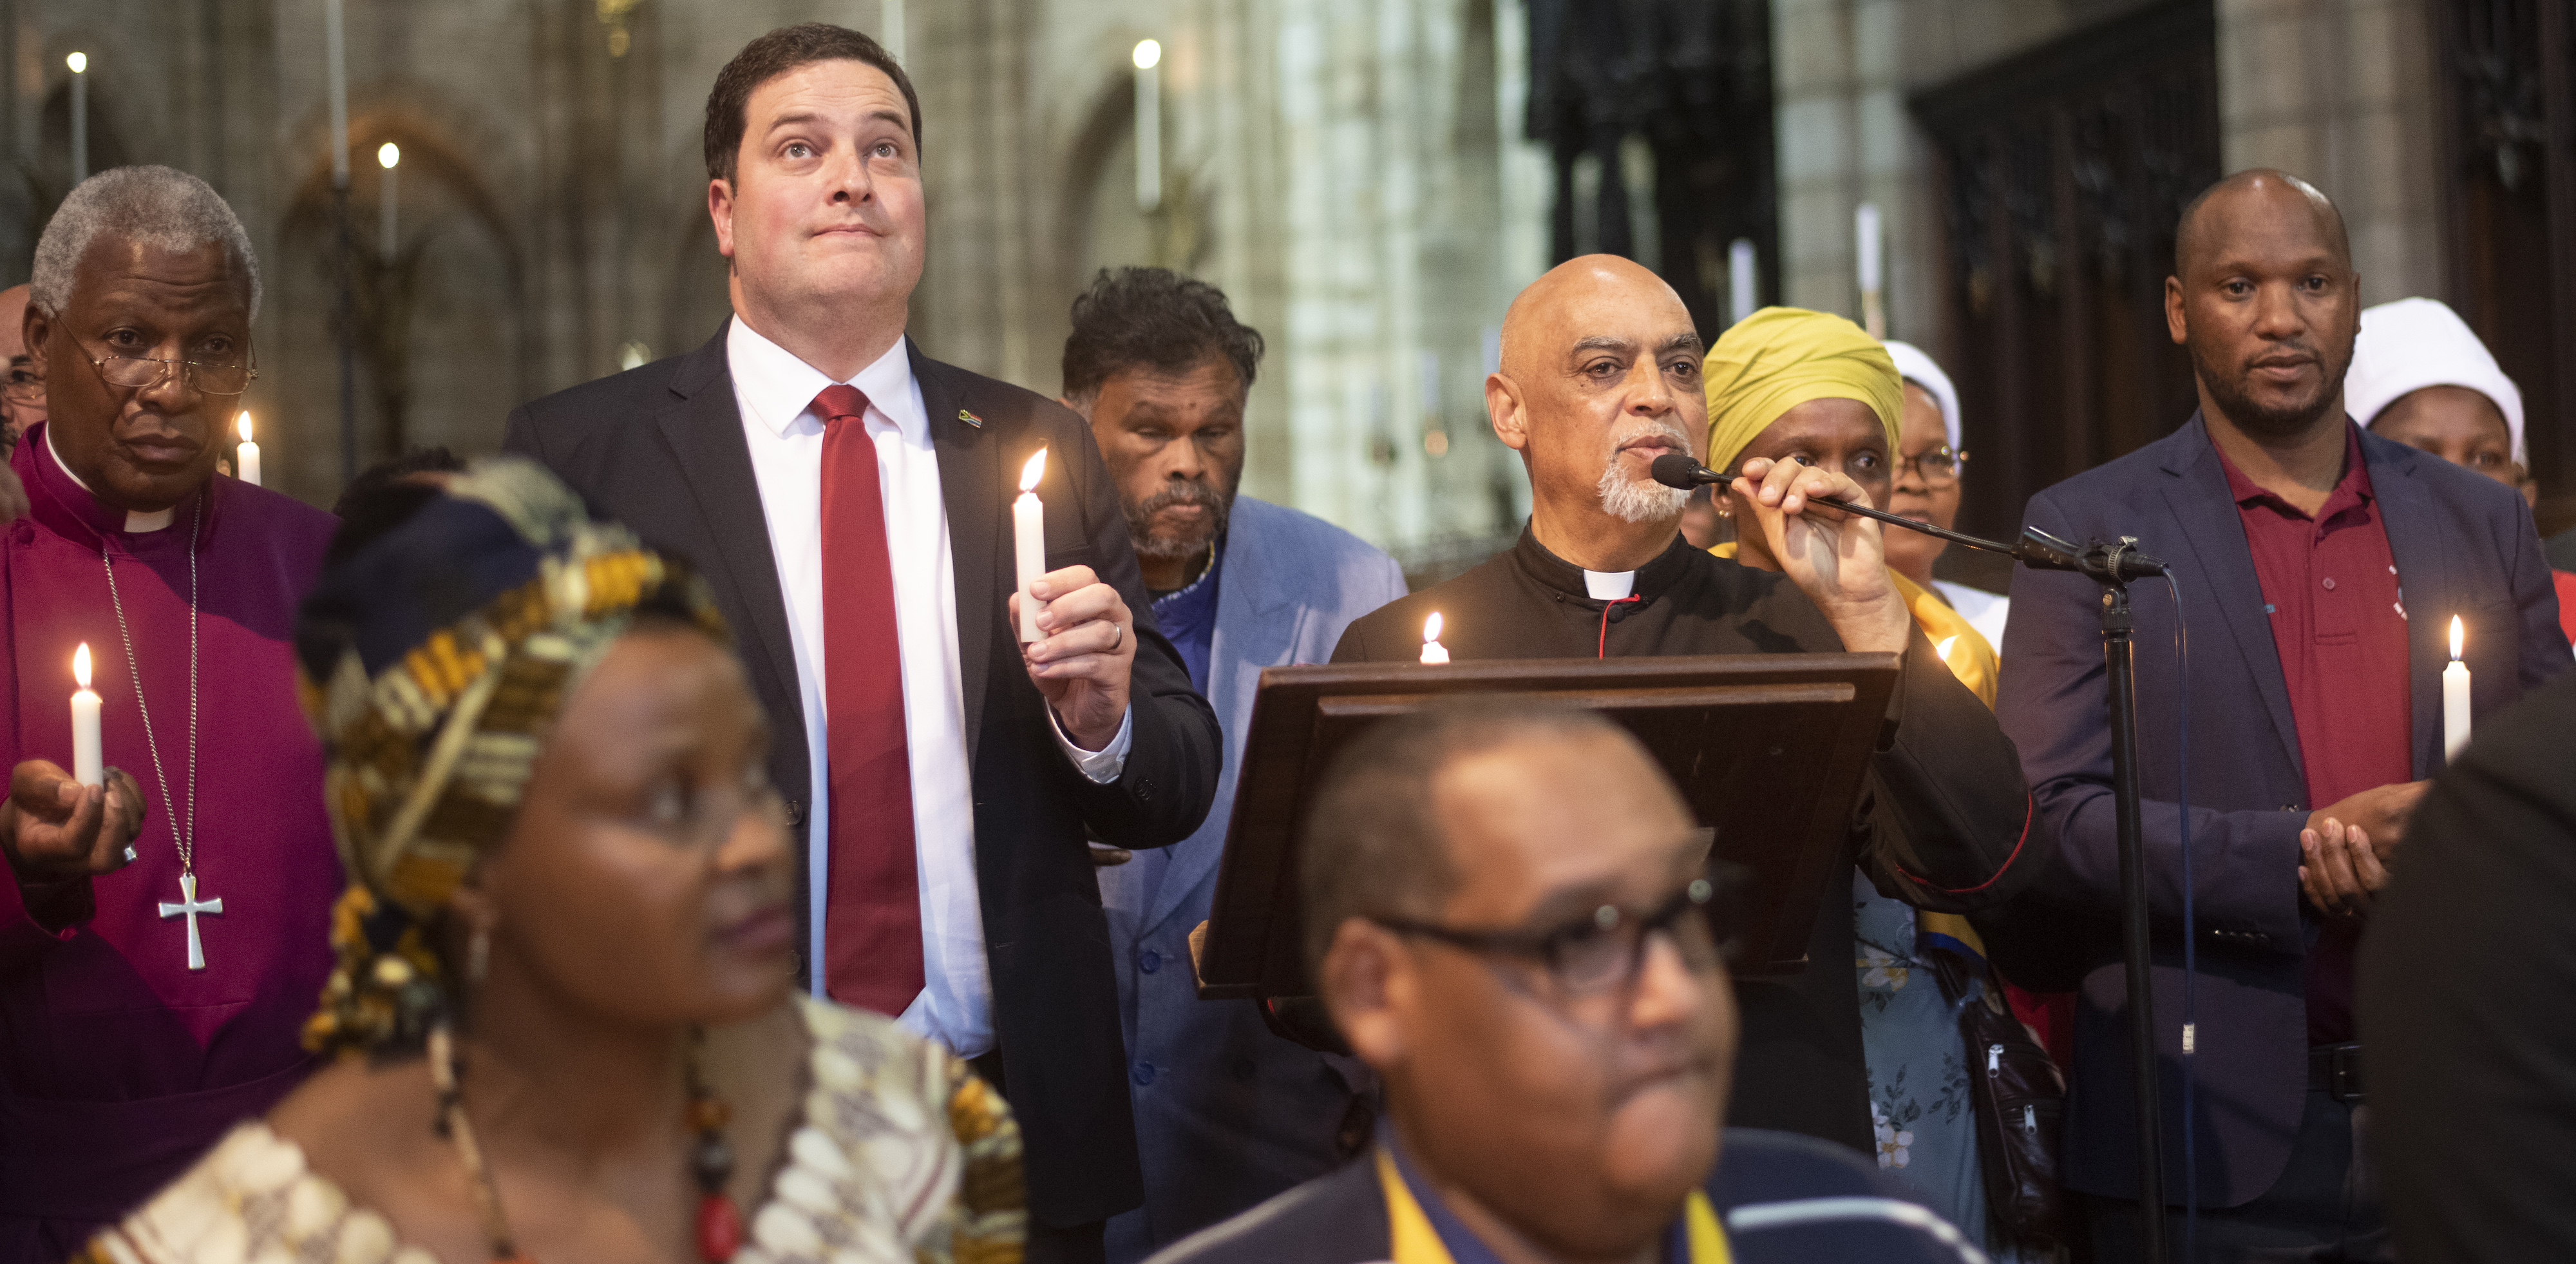 Archbishop Thabo Makgoba, Mayor of Cape Town Geordin Hill-Lewis, Dean Michael Weeder of St George's Cathedral and Santaco Western Cape chairperson Mandla Hermanus